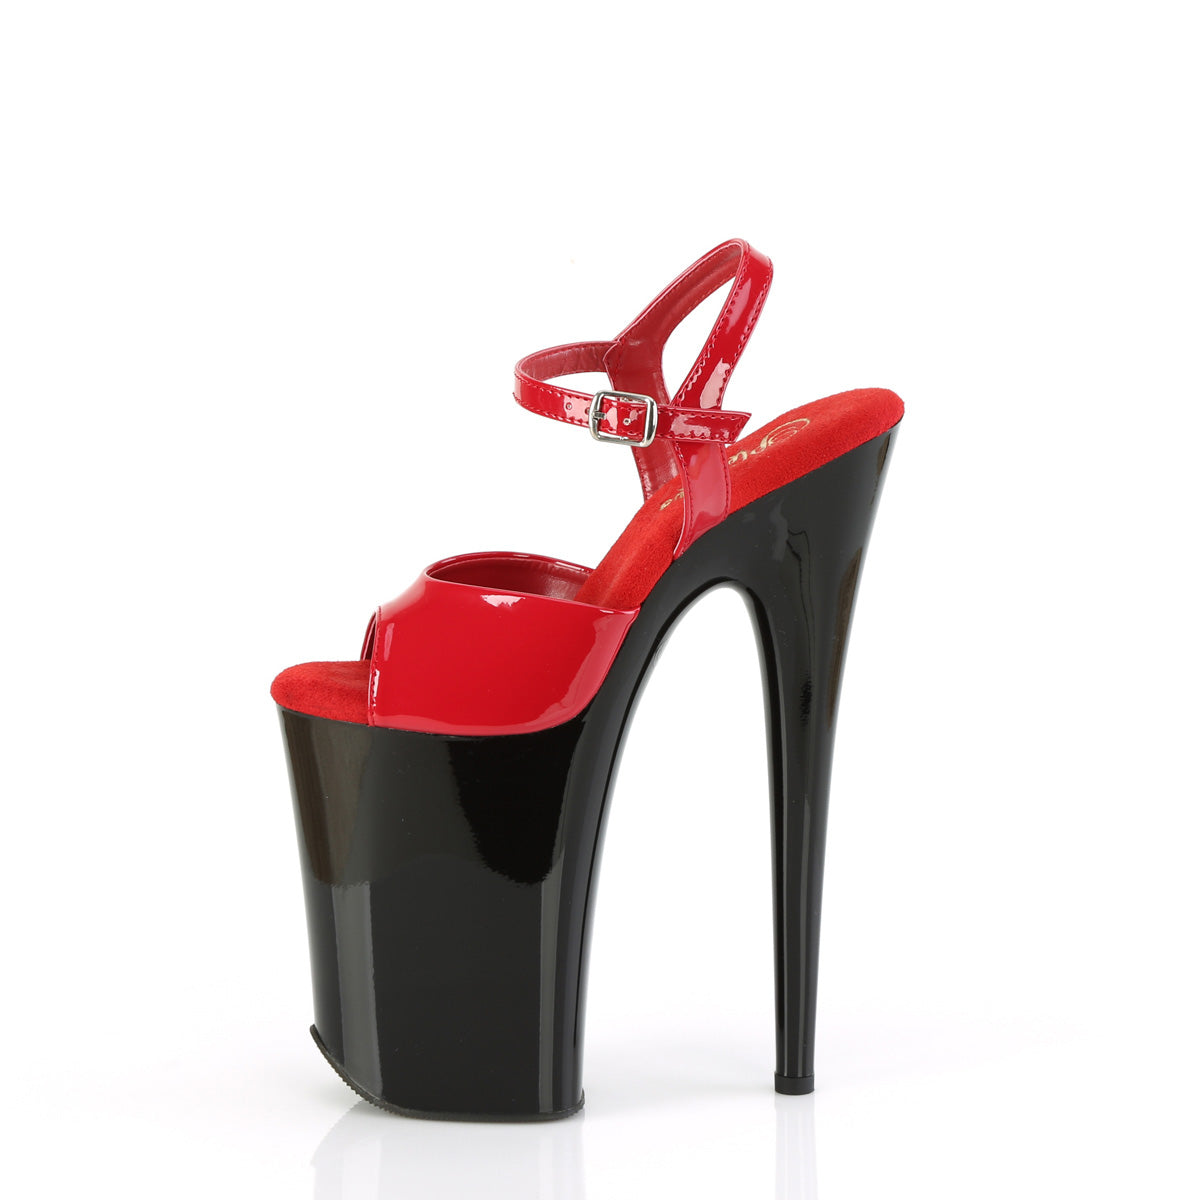 INFINITY-909 Pleaser Red Patent/Black Platform Shoes [Sexy Shoes]